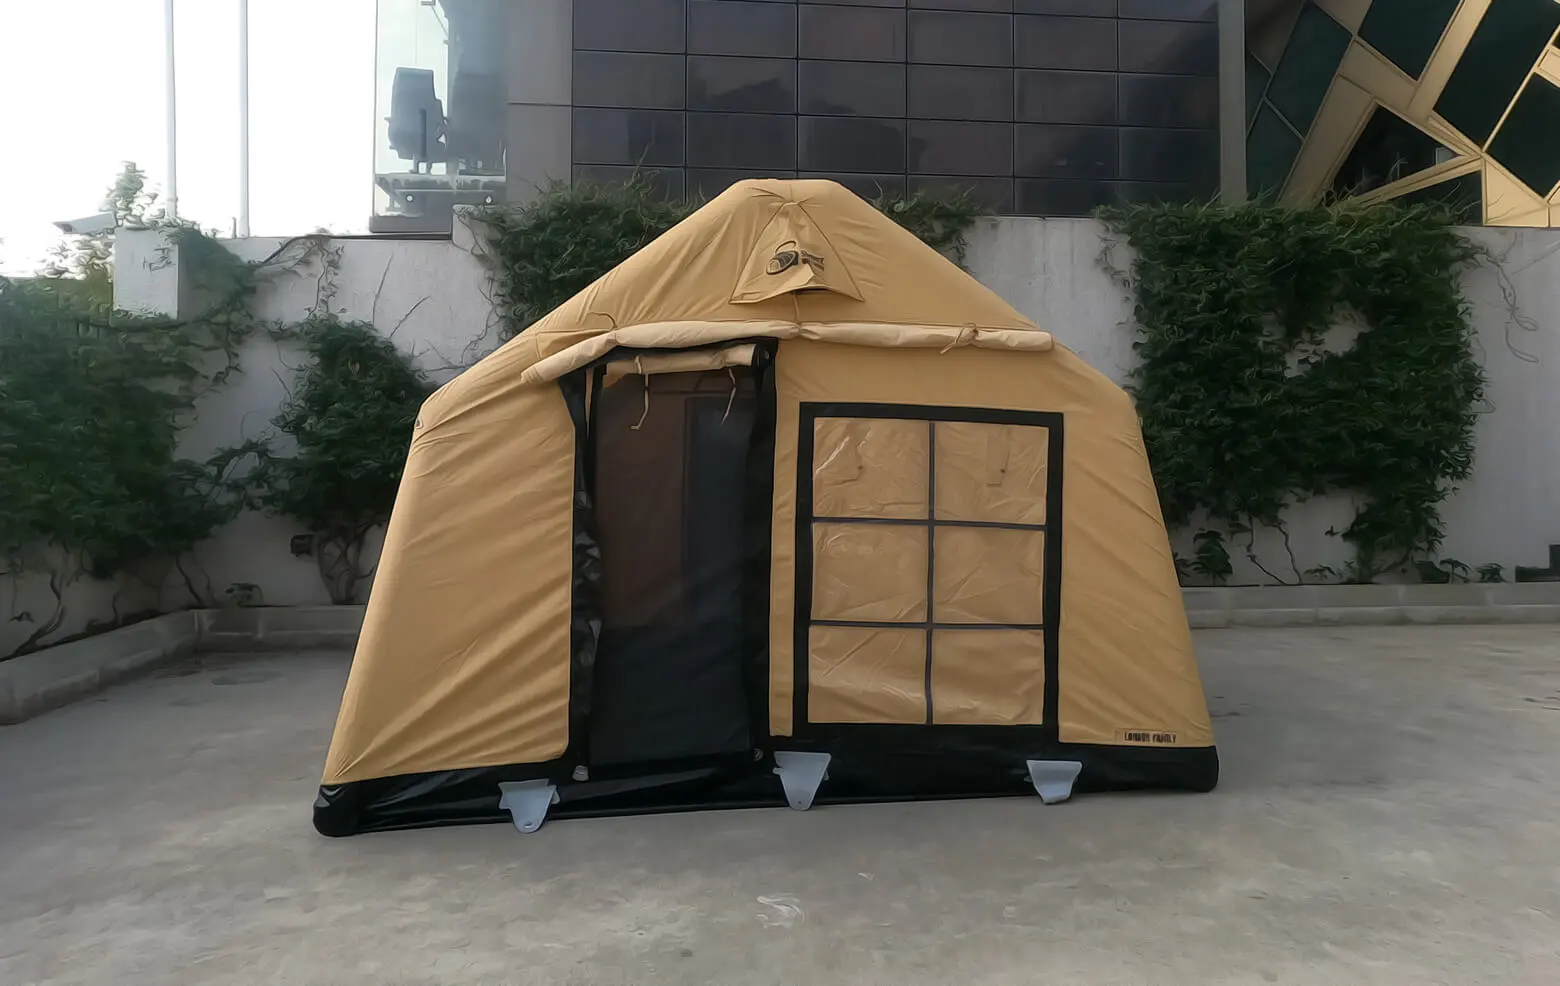 Extra Large Inflatable Camping Tent with Pump